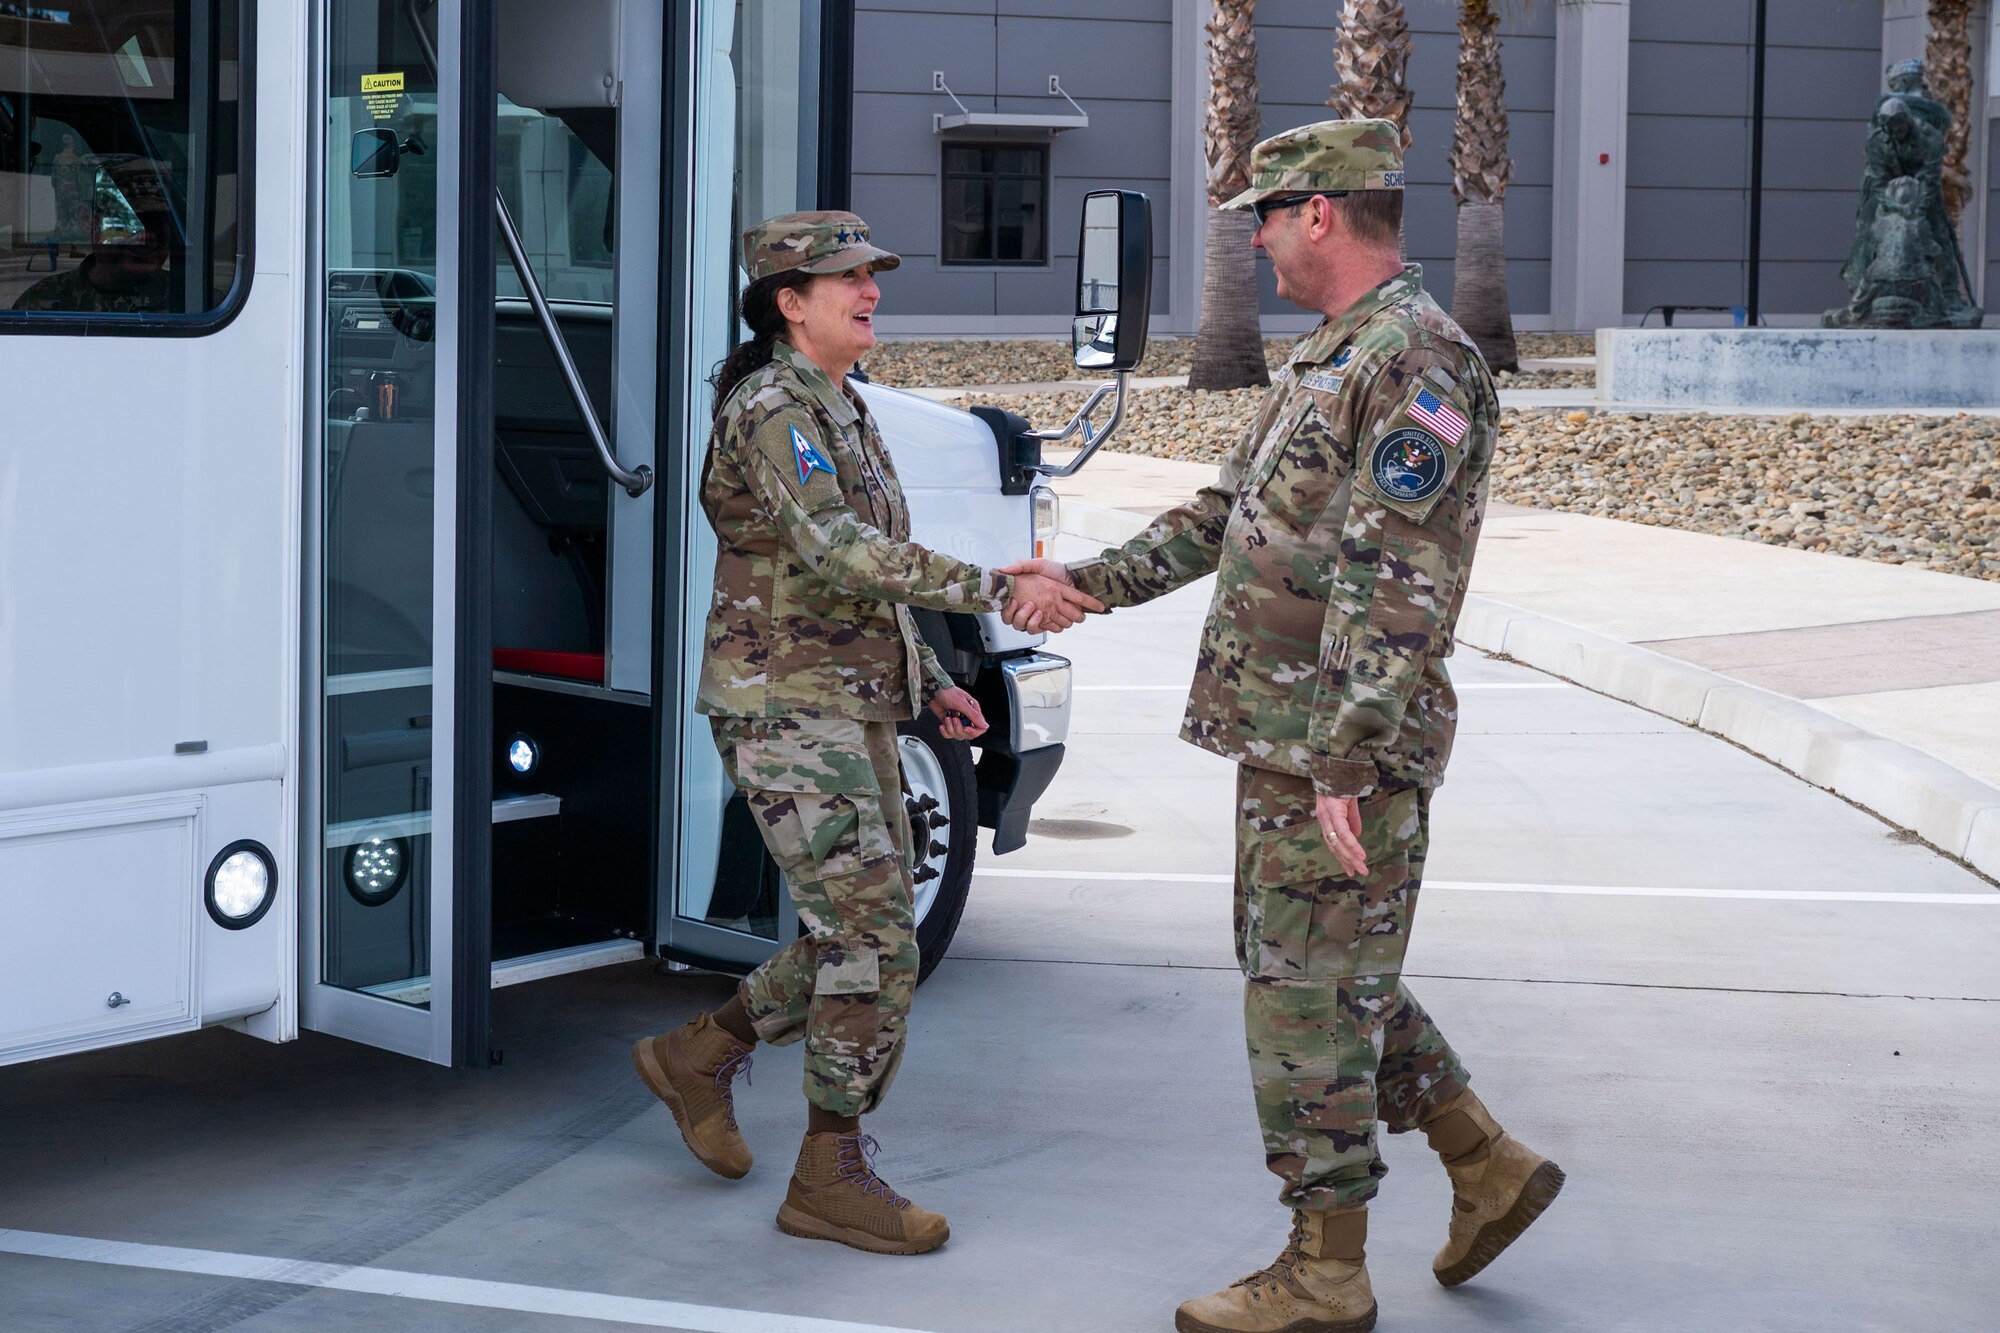 U.S. Space Force Maj. Gen. Douglas A. Schiess, Combined Force Space Component Command commander, greets U.S. Space Force Lt. Gen. Nina M. Armagno, U.S. Space Force Director of Staff, during a visit to Vandenberg Space Force Base, CA, Feb. 23, 2023. Armagno synchronizes policy, plans, positions, procedures and cross functional issues for the Space Force Headquarters staff and is a career space operator with over 34 years of experience. (U.S. Space Force photo by Tech. Sgt. Luke Kitterman)